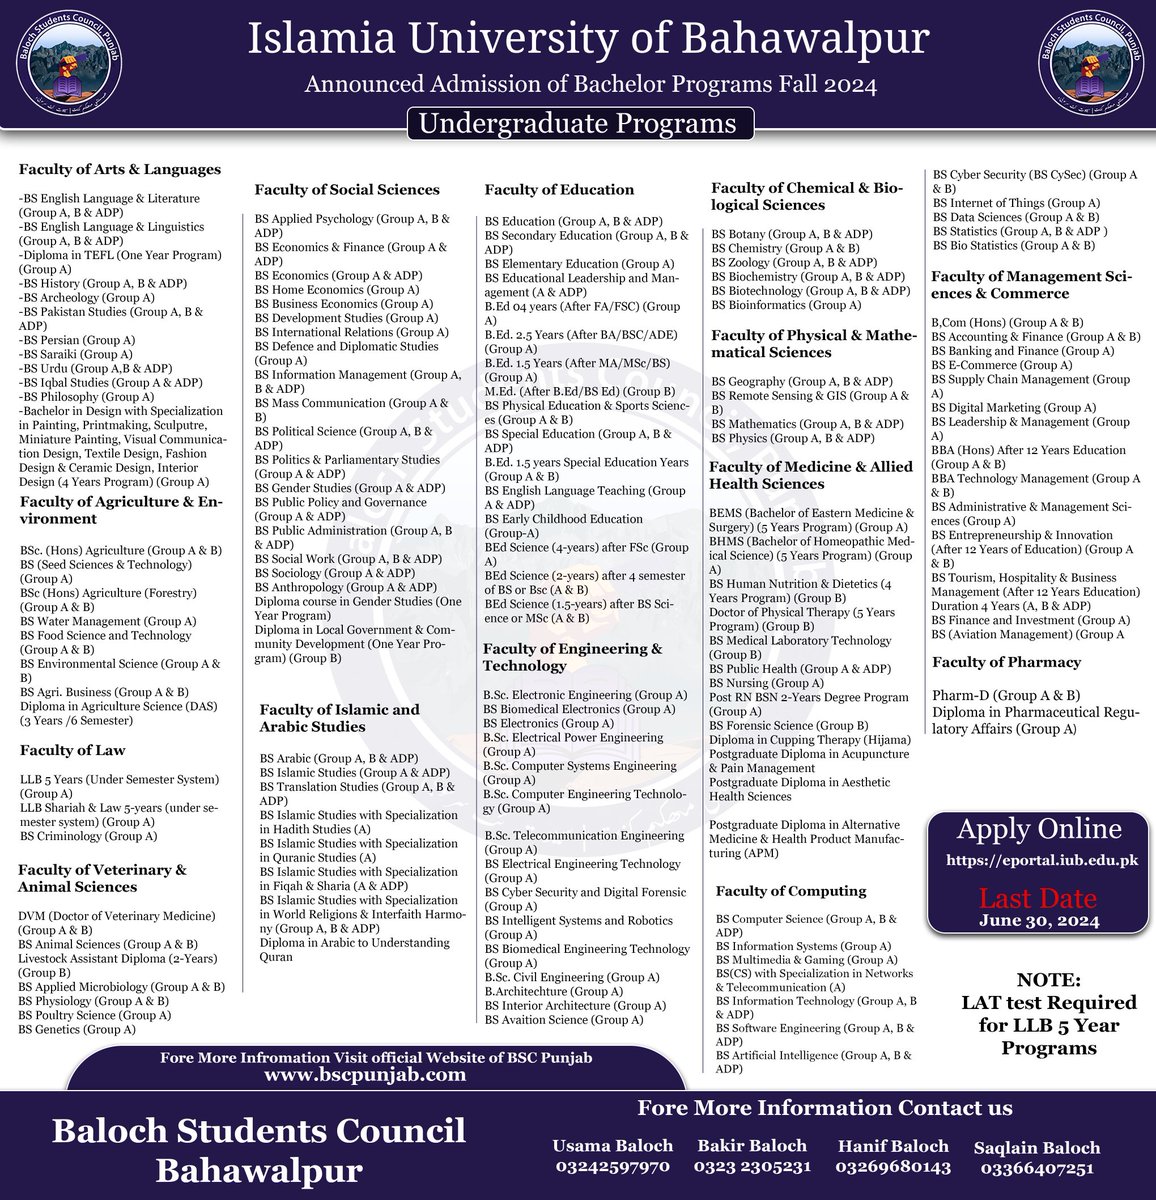 Admissions are Open The Islamia University Of Bahawalpur has announced admission for Fall-2024 The applicants can apply through online eportal.iub.edu.pk Last date for submission of online Admission forms: 30/06/2024